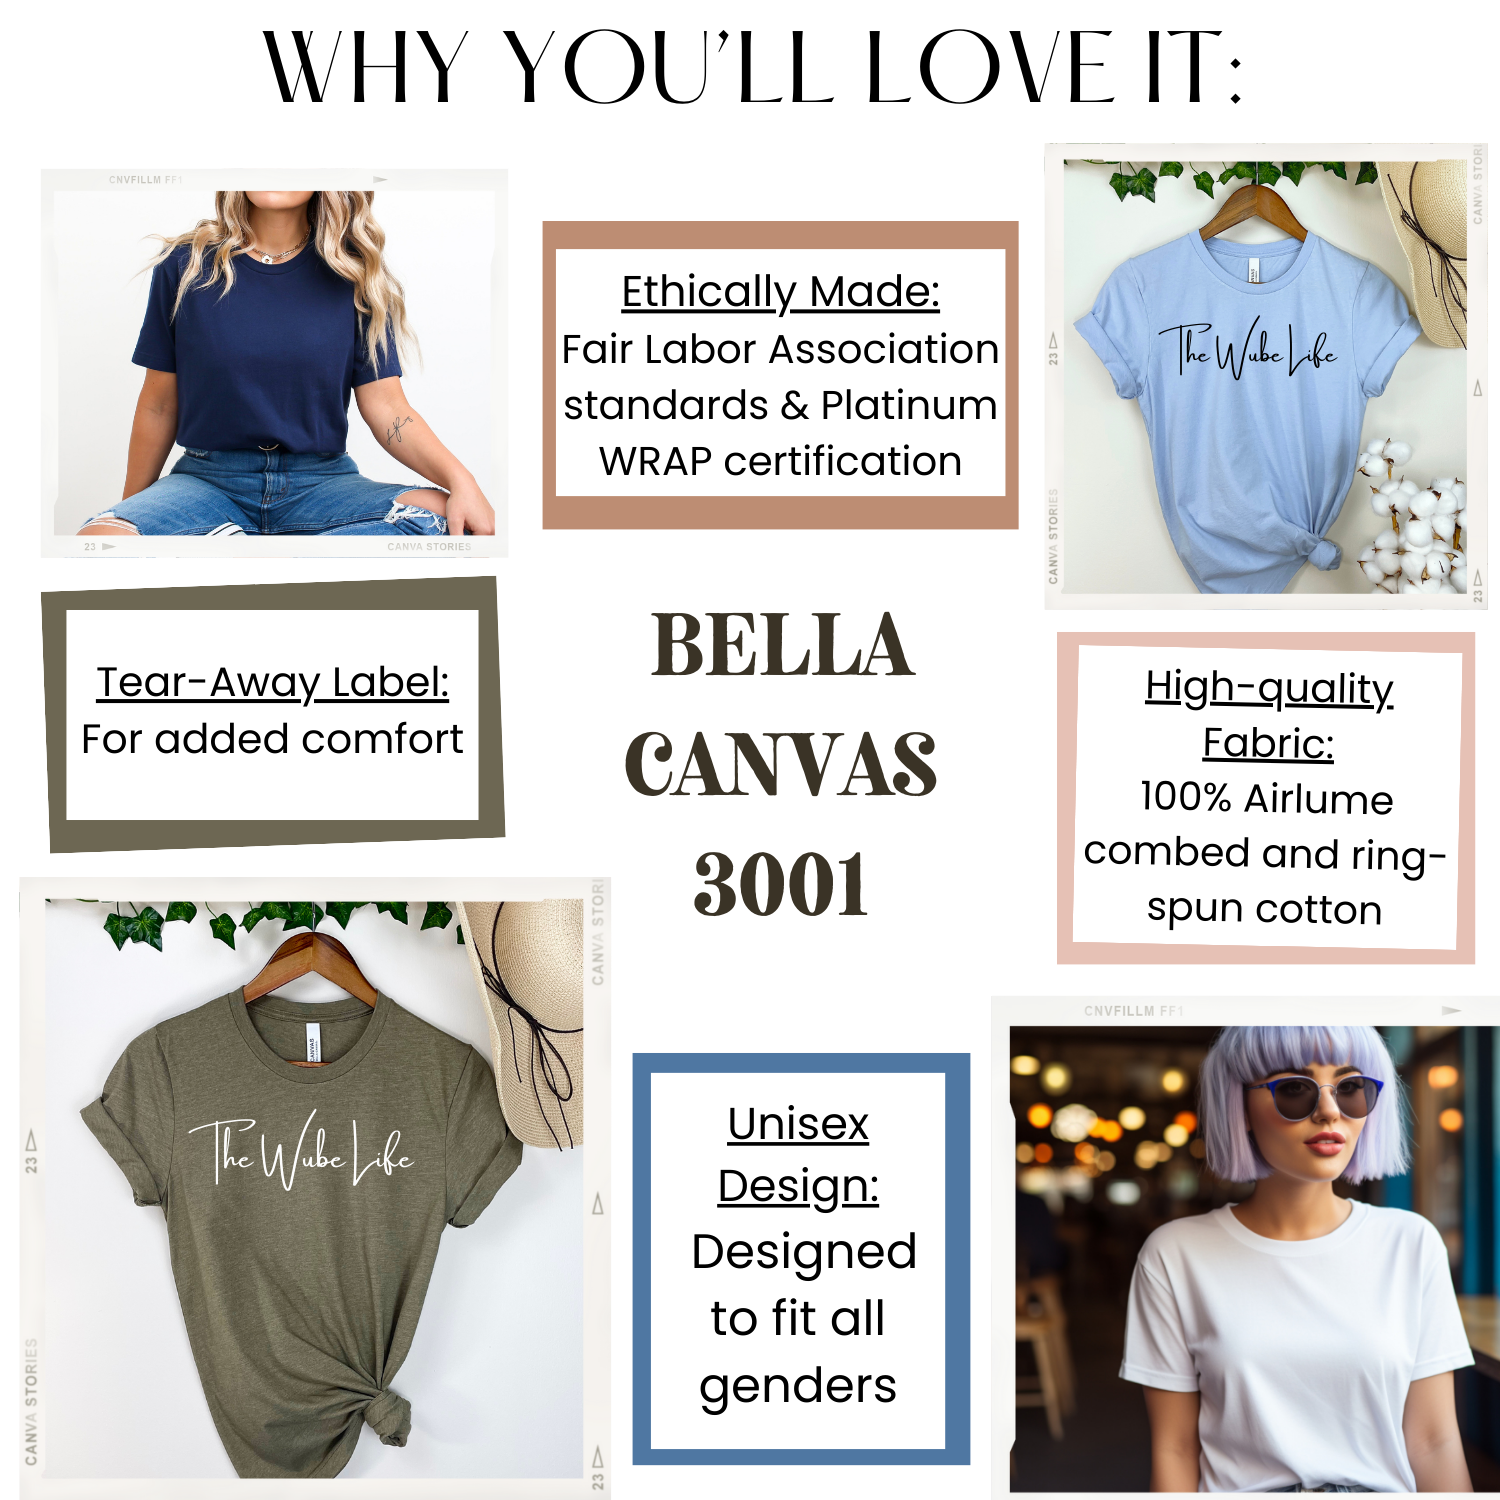 Reasons you'll love the bella canvas 3001 tee's from The Wube Life Design Shop: ethically made, high-quality fabric, tear-away label, unisex design